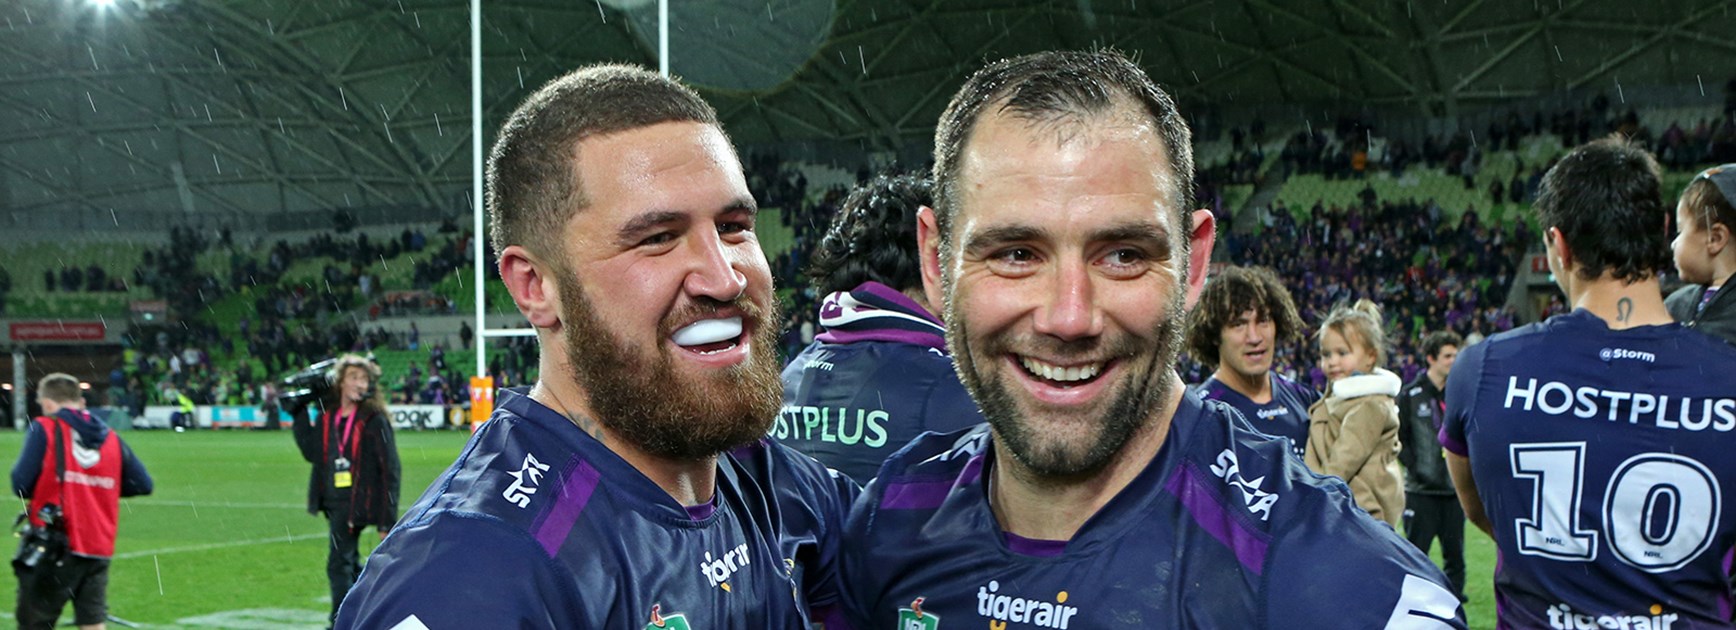 Melbourne Storm's Kenny Bromwich and Cameron Smith after their preliminary final win over Canberra.